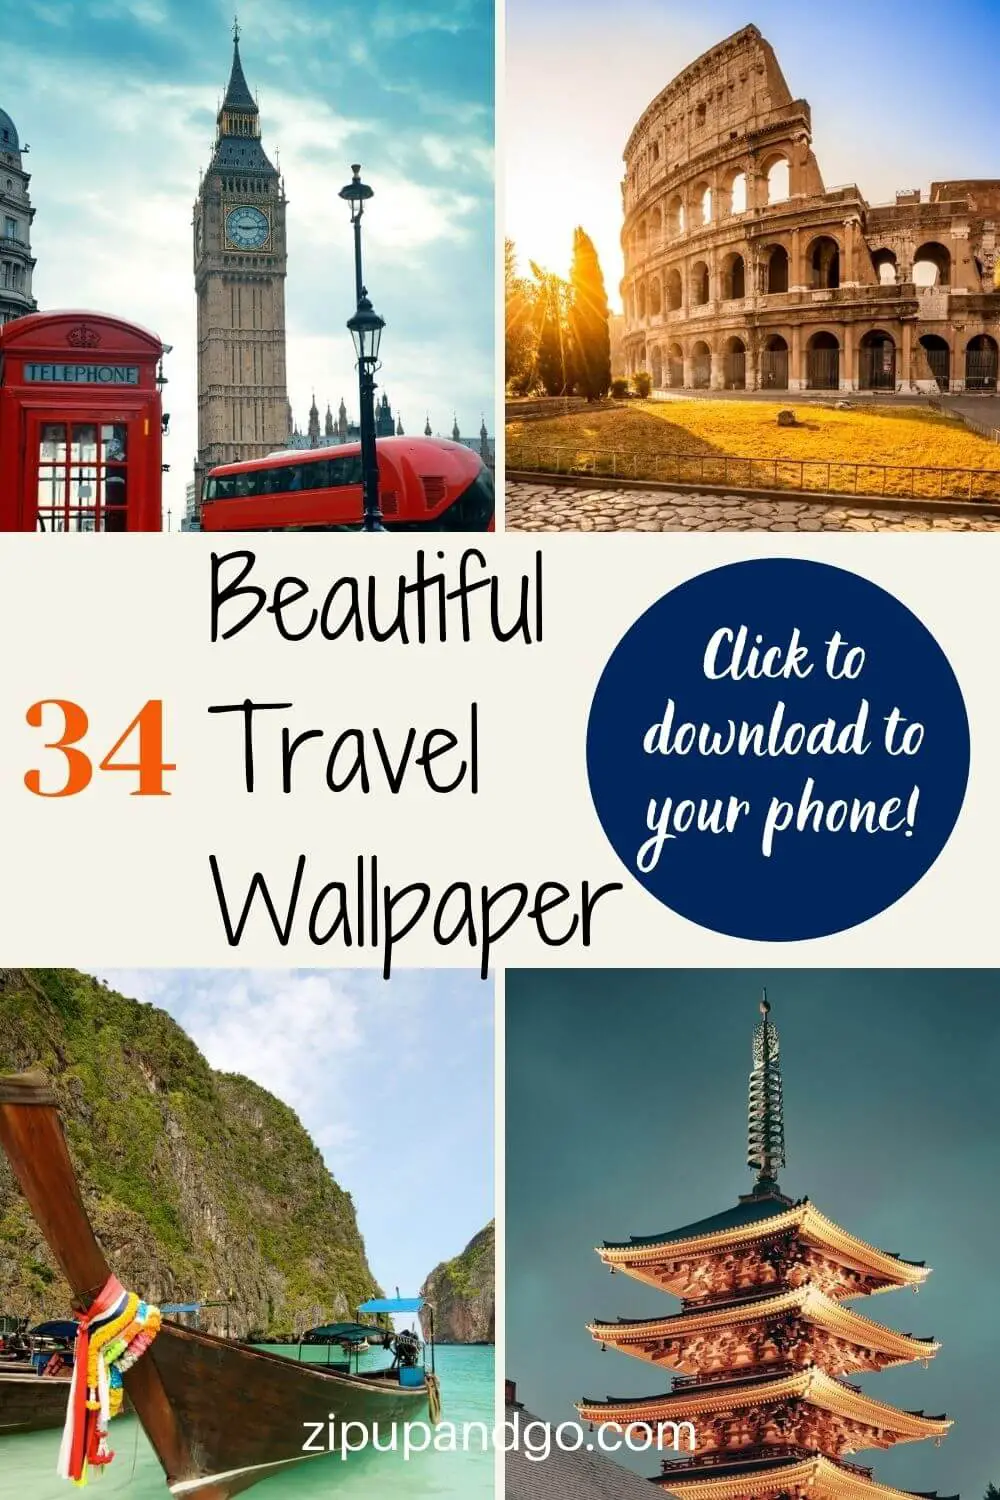 Beautiful Travel Aesthetic Wallpaper For Free Download pinterest 2